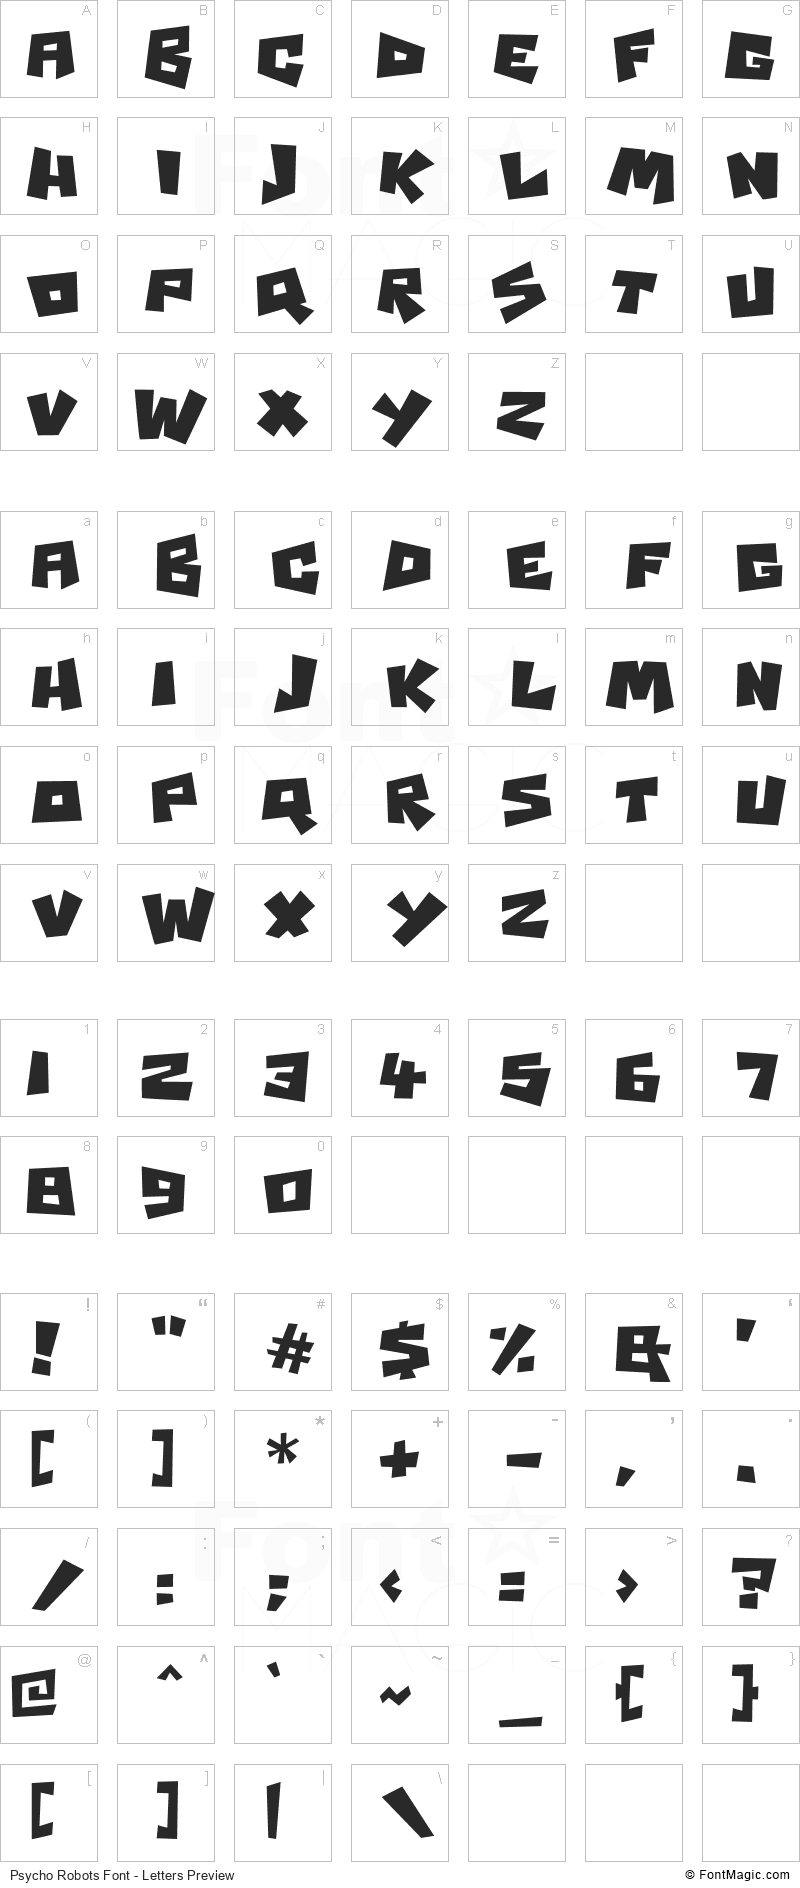 Psycho Robots Font - All Latters Preview Chart